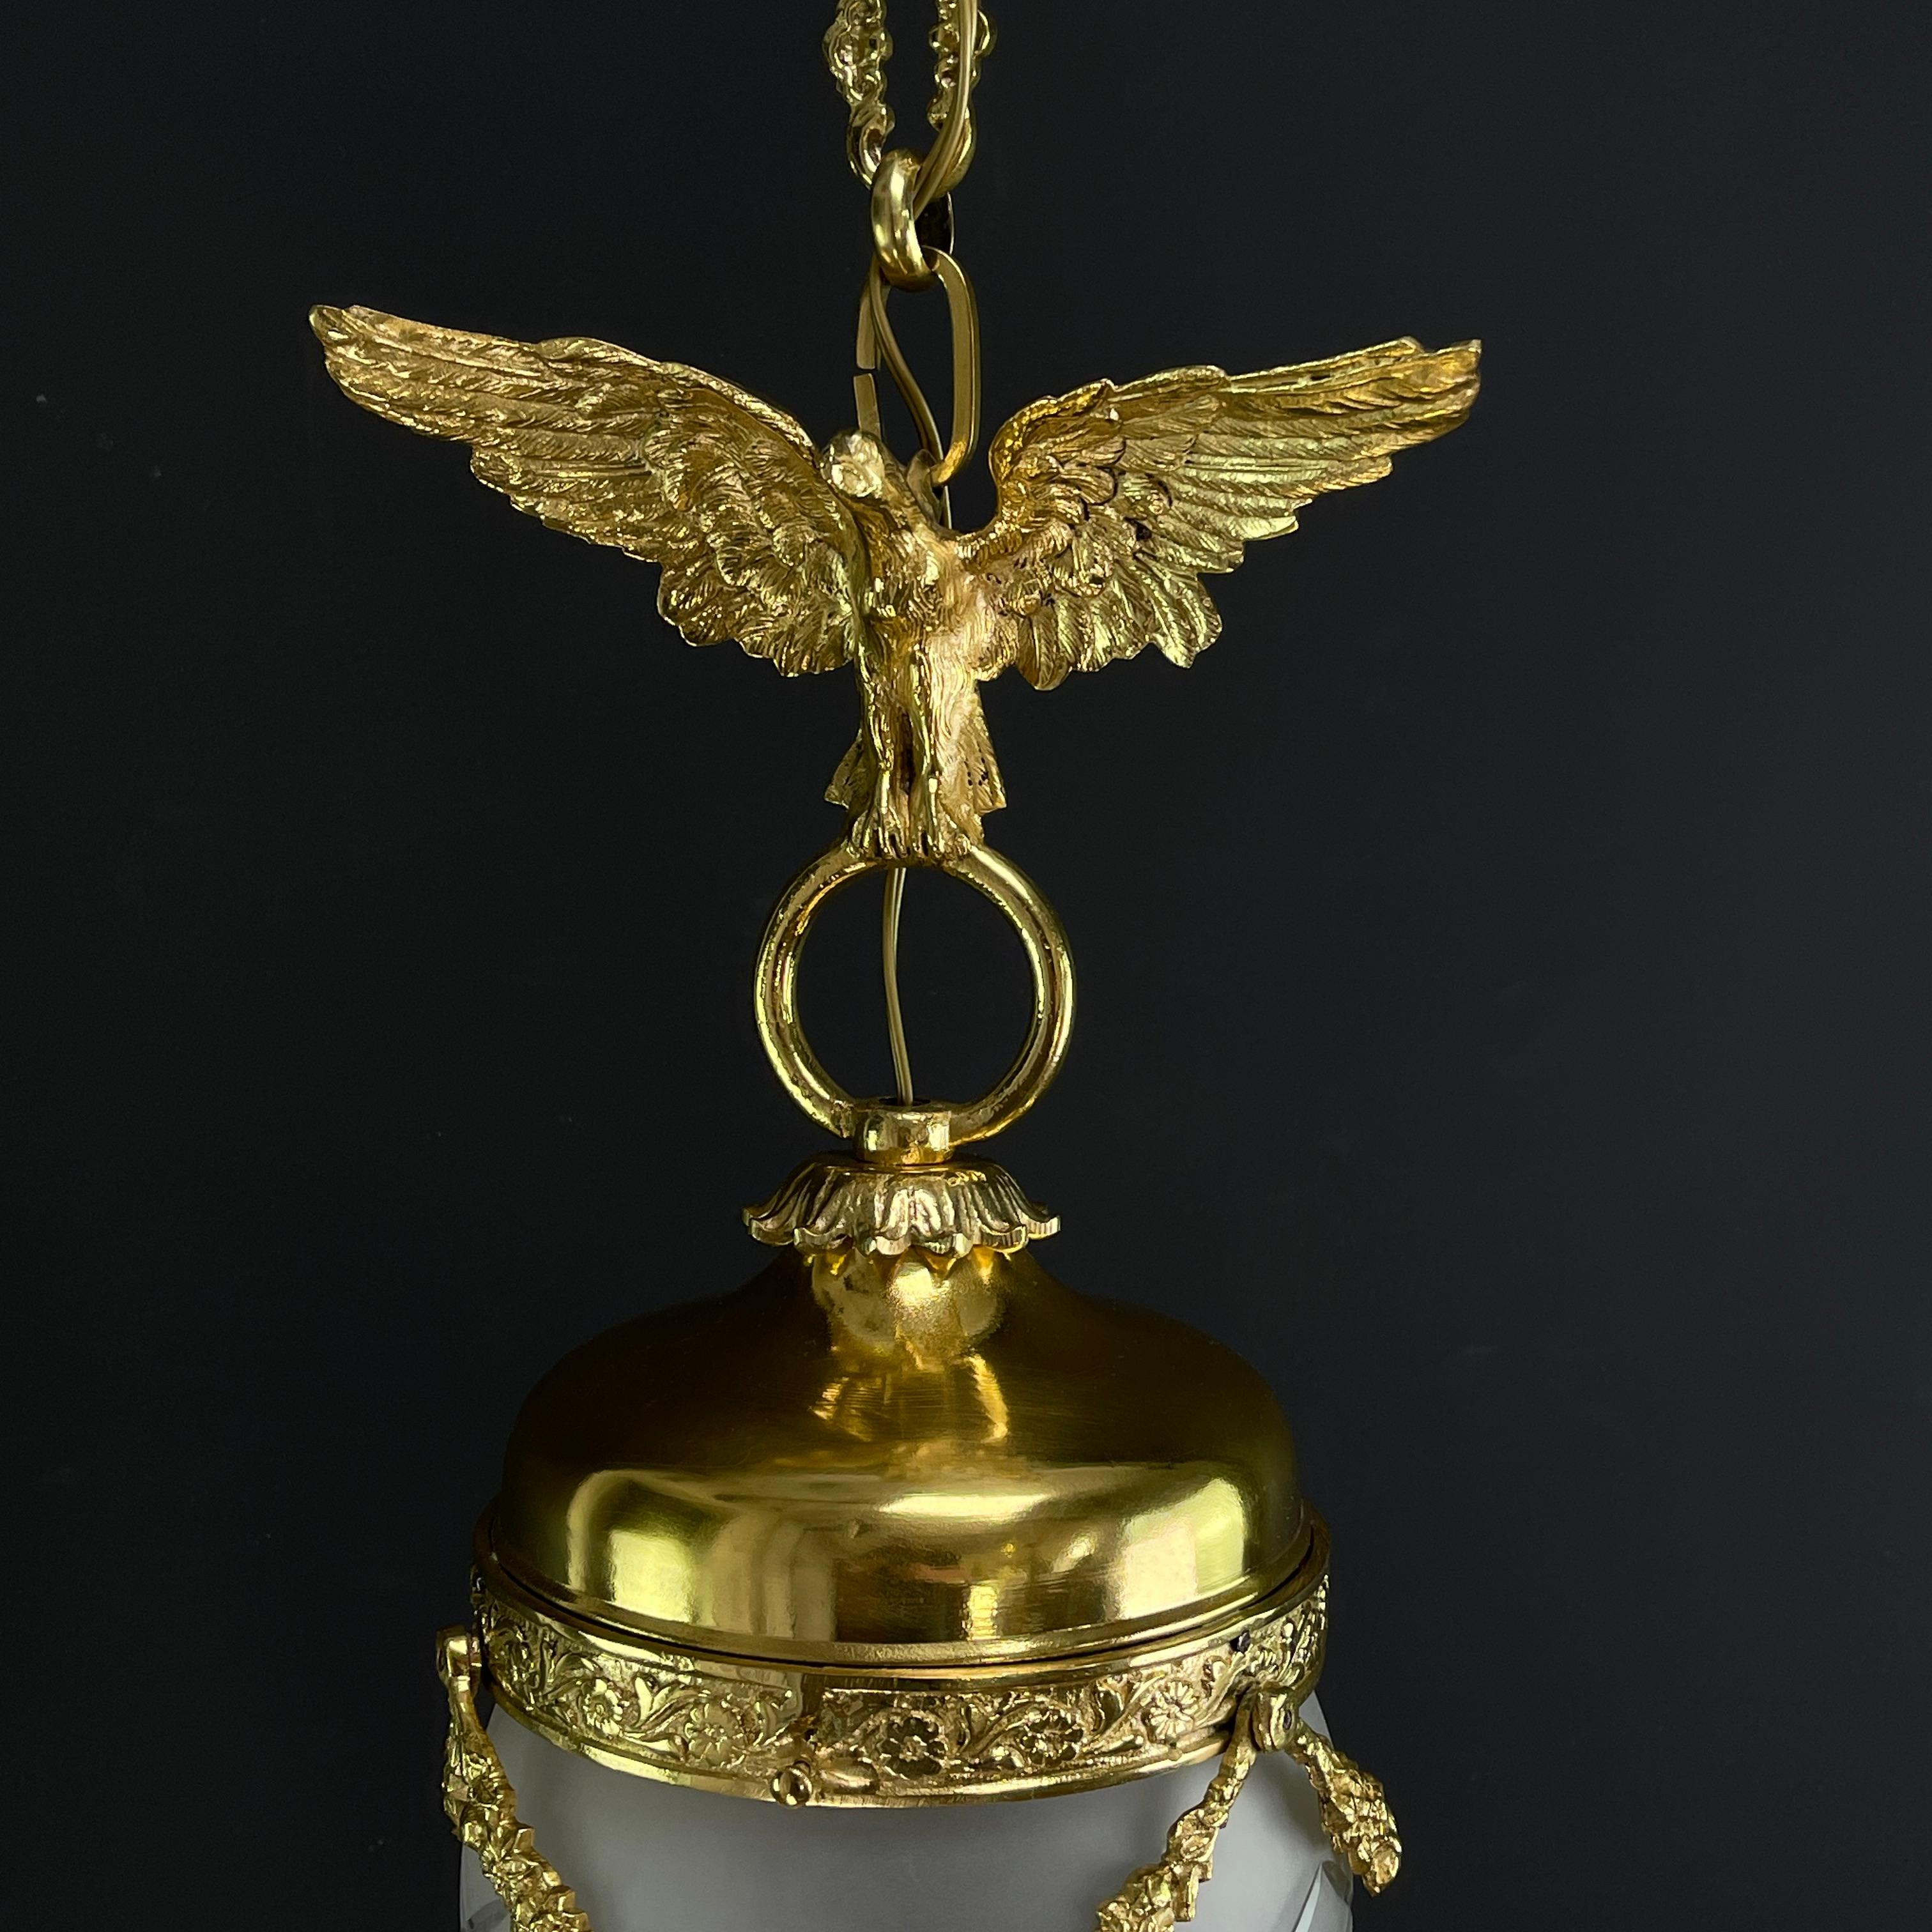 French Art Nouveau Hanging Lamp Bronze with eagle, Teardrop Shape, 1900s For Sale